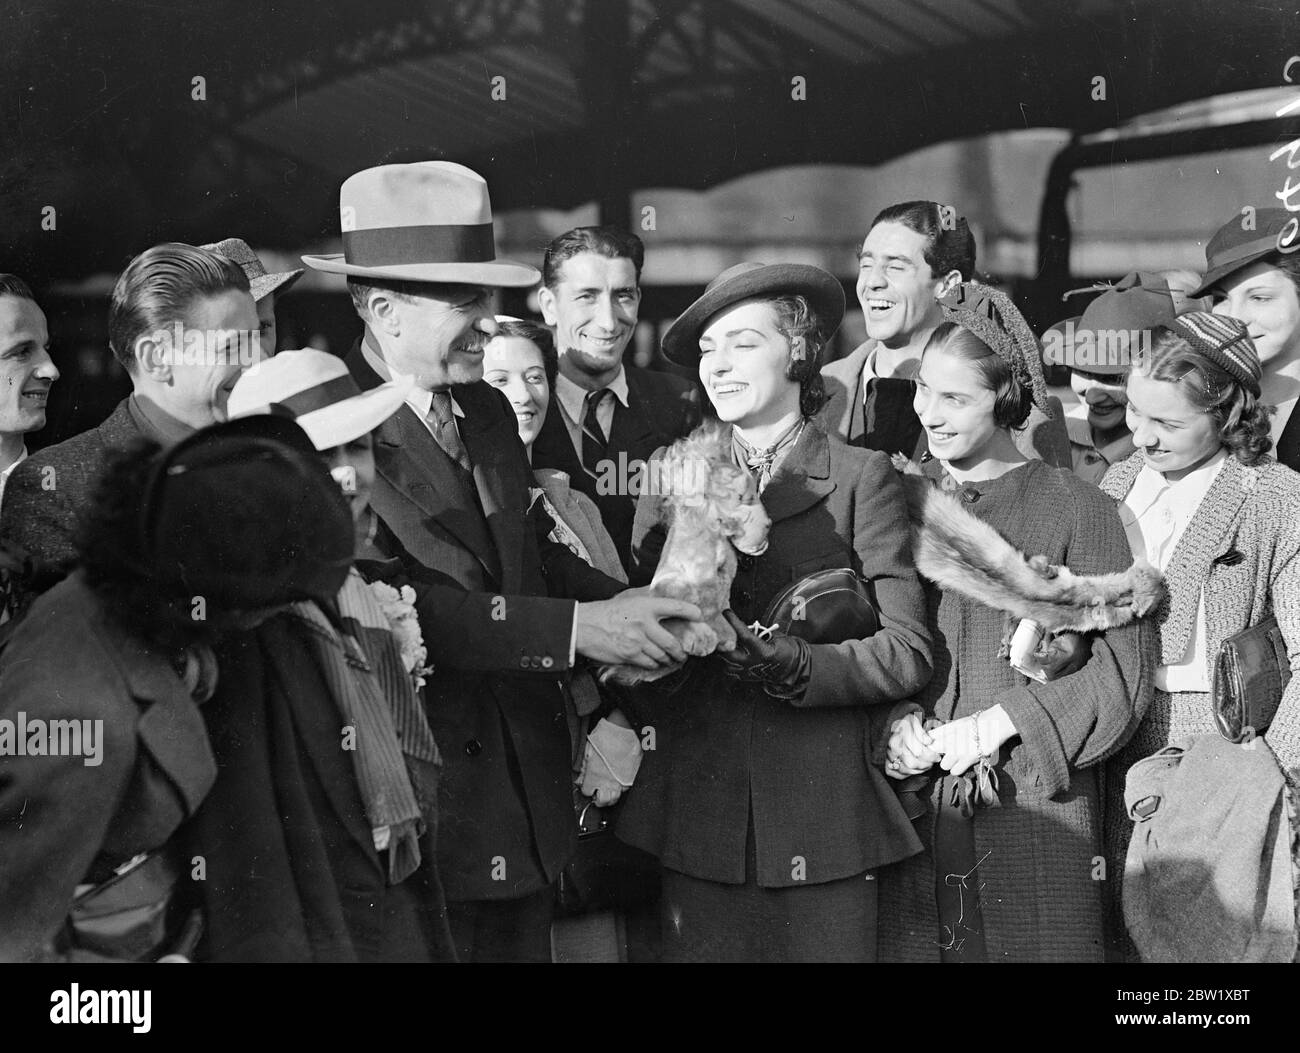 Russian ballet arrives in London to dance before Queen Mary. Members of the Russian ballet who are to appear before Queen Mary and the Duchess of Kent in London next Monday arrived at Victoria station from Paris. They they were met by the director, M Rene Blum, who is a brother of France's Socialist Premier. Photo shows, M Rene Blum presenting a lion mascot to Nana Gollner when the Russian ballet arrived at Victoria. 28 May 1937 Stock Photo